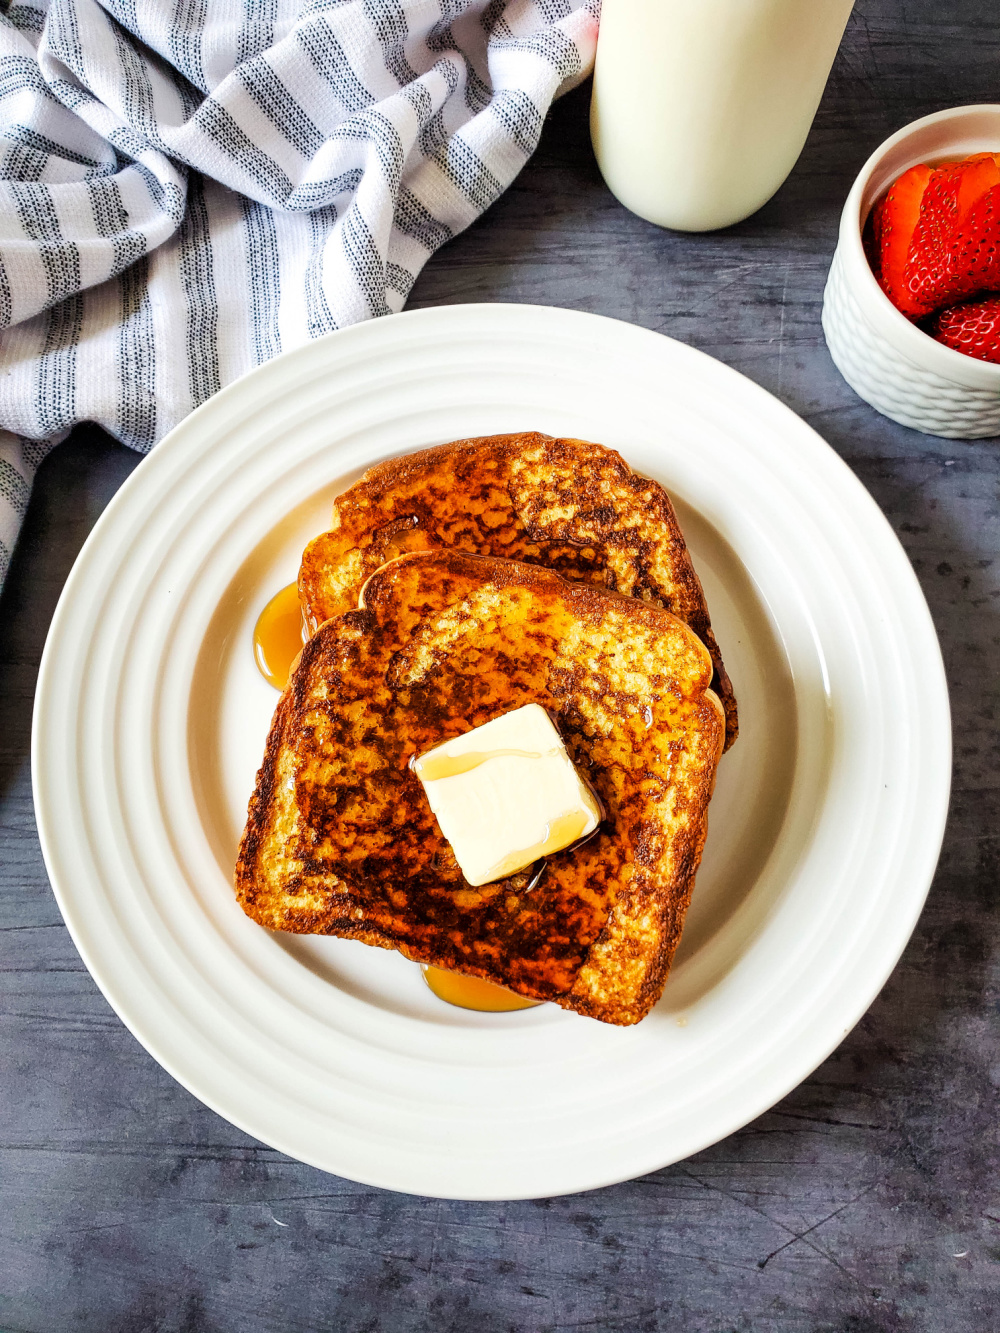 Cinnamon French toast slices with butter and syrup on white plate